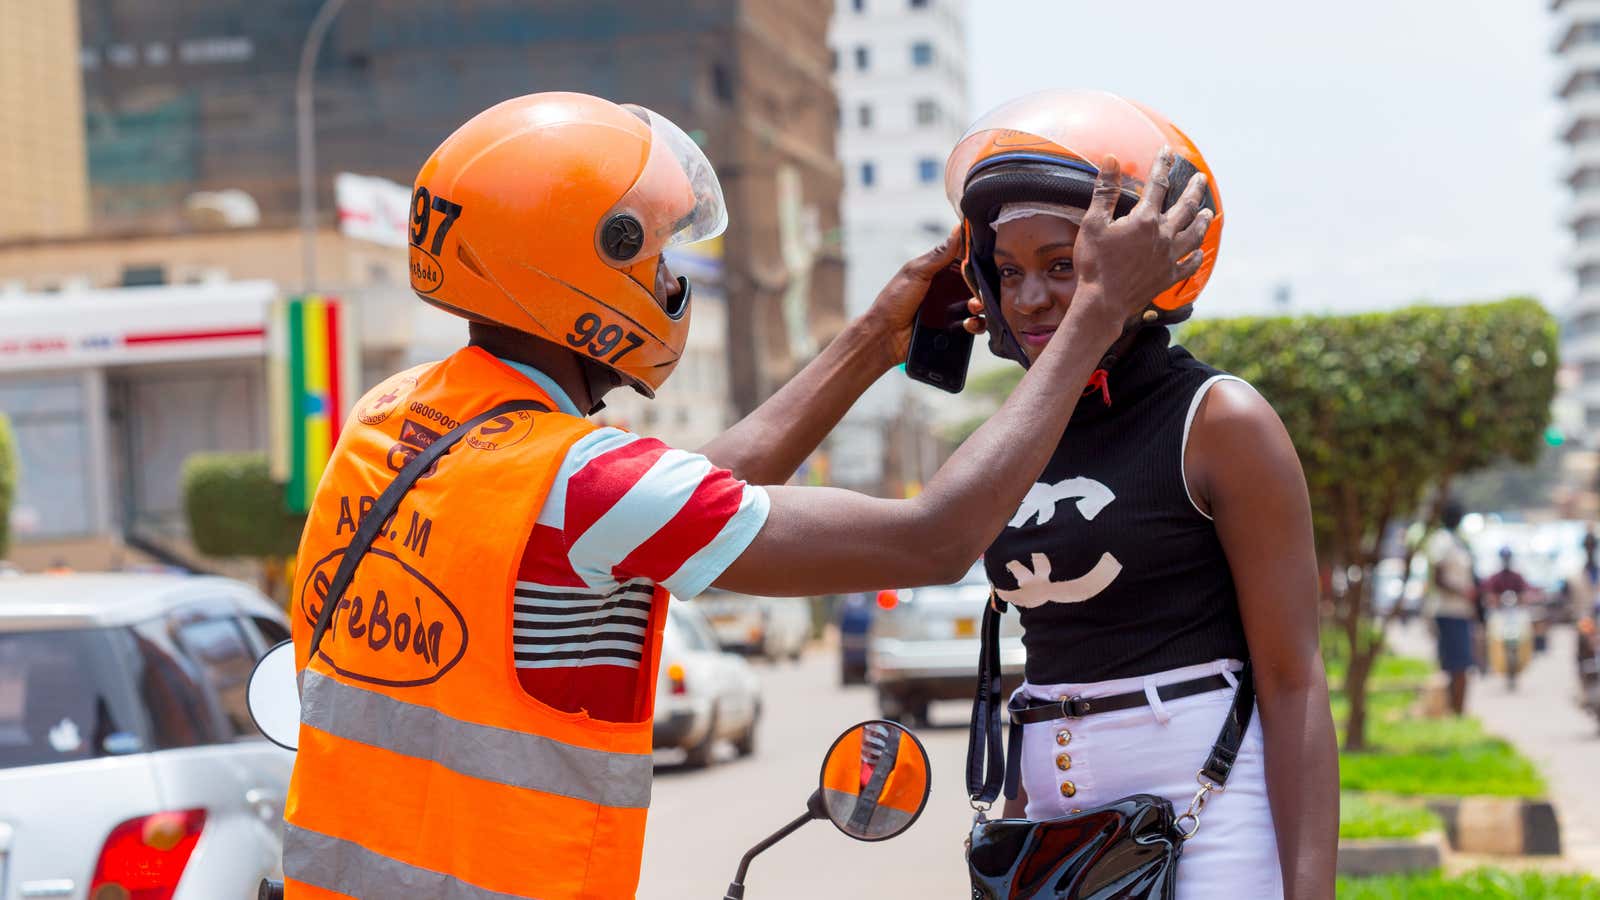 Safety first for SafeBoda.